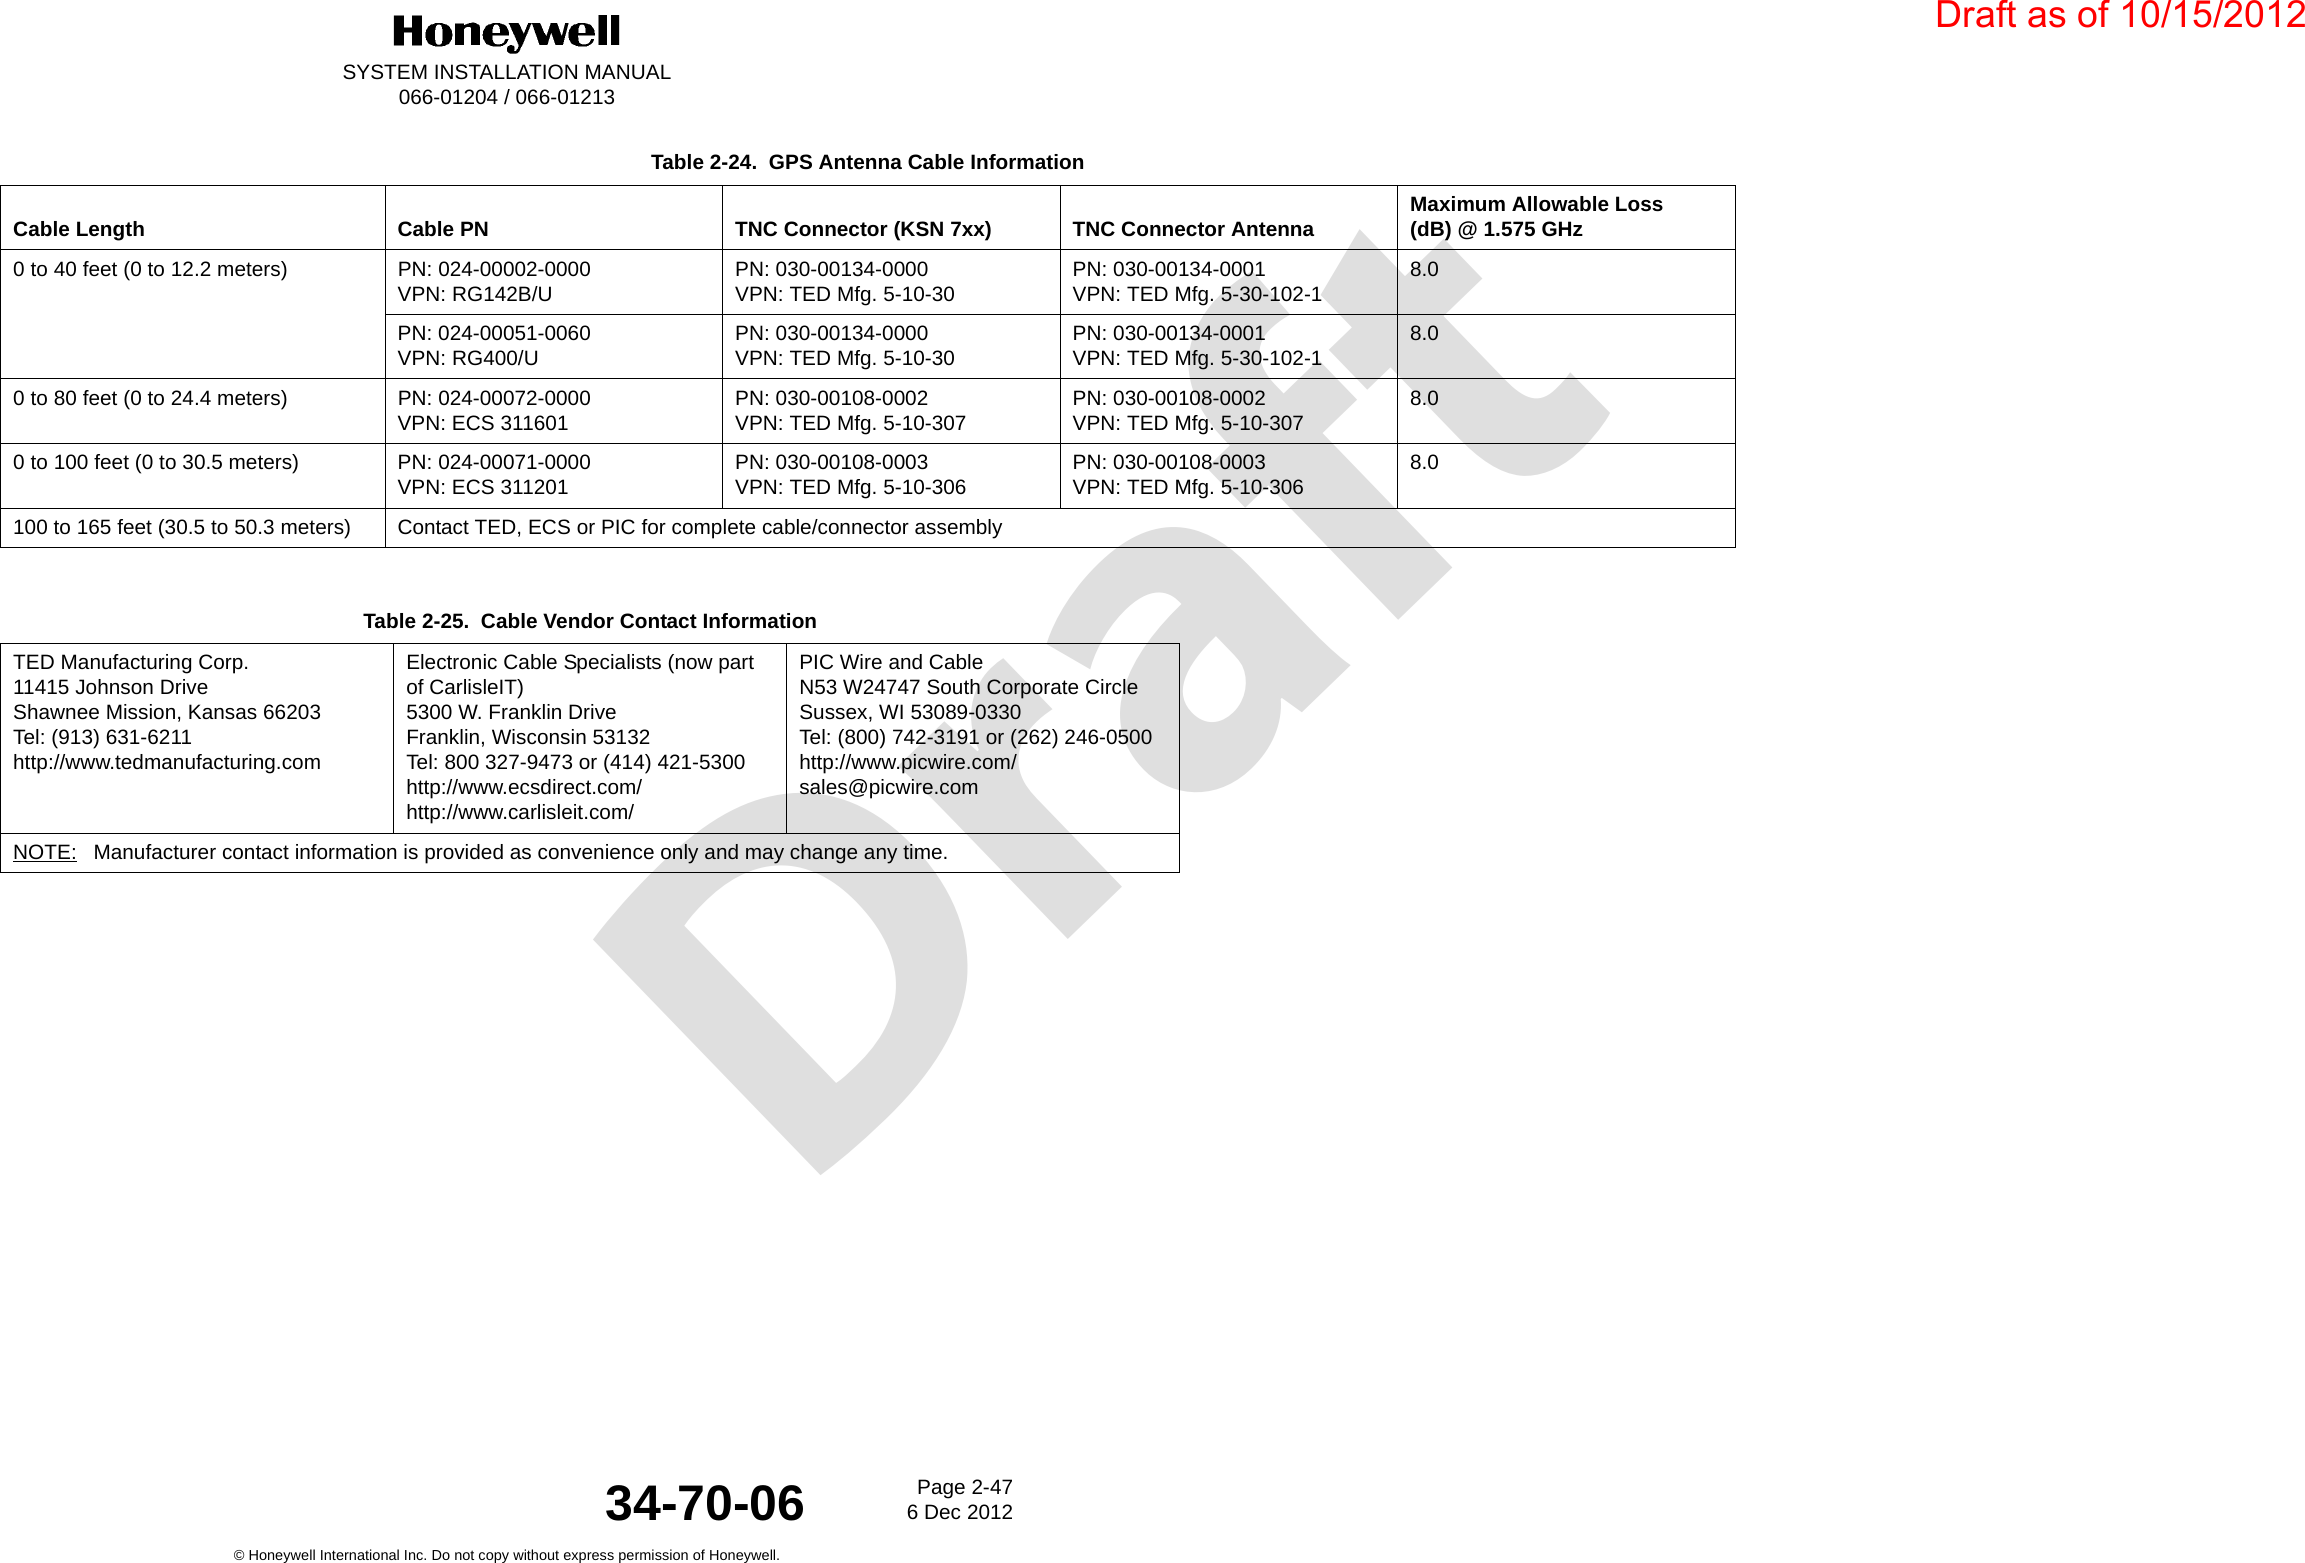 DraftSYSTEM INSTALLATION MANUAL066-01204 / 066-01213Page 2-476 Dec 2012© Honeywell International Inc. Do not copy without express permission of Honeywell.34-70-06Table 2-24.  GPS Antenna Cable InformationCable Length Cable PN TNC Connector (KSN 7xx) TNC Connector Antenna Maximum Allowable Loss(dB) @ 1.575 GHz0 to 40 feet (0 to 12.2 meters) PN: 024-00002-0000VPN: RG142B/U PN: 030-00134-0000VPN: TED Mfg. 5-10-30 PN: 030-00134-0001VPN: TED Mfg. 5-30-102-1 8.0PN: 024-00051-0060VPN: RG400/U PN: 030-00134-0000VPN: TED Mfg. 5-10-30 PN: 030-00134-0001VPN: TED Mfg. 5-30-102-1 8.00 to 80 feet (0 to 24.4 meters) PN: 024-00072-0000VPN: ECS 311601 PN: 030-00108-0002VPN: TED Mfg. 5-10-307 PN: 030-00108-0002VPN: TED Mfg. 5-10-307 8.00 to 100 feet (0 to 30.5 meters) PN: 024-00071-0000VPN: ECS 311201 PN: 030-00108-0003VPN: TED Mfg. 5-10-306 PN: 030-00108-0003VPN: TED Mfg. 5-10-306 8.0100 to 165 feet (30.5 to 50.3 meters) Contact TED, ECS or PIC for complete cable/connector assemblyTable 2-25.  Cable Vendor Contact InformationTED Manufacturing Corp.11415 Johnson DriveShawnee Mission, Kansas 66203Tel: (913) 631-6211http://www.tedmanufacturing.comElectronic Cable Specialists (now part of CarlisleIT)5300 W. Franklin DriveFranklin, Wisconsin 53132Tel: 800 327-9473 or (414) 421-5300http://www.ecsdirect.com/http://www.carlisleit.com/PIC Wire and CableN53 W24747 South Corporate CircleSussex, WI 53089-0330Tel: (800) 742-3191 or (262) 246-0500http://www.picwire.com/sales@picwire.comNOTE: Manufacturer contact information is provided as convenience only and may change any time.Draft as of 10/15/2012